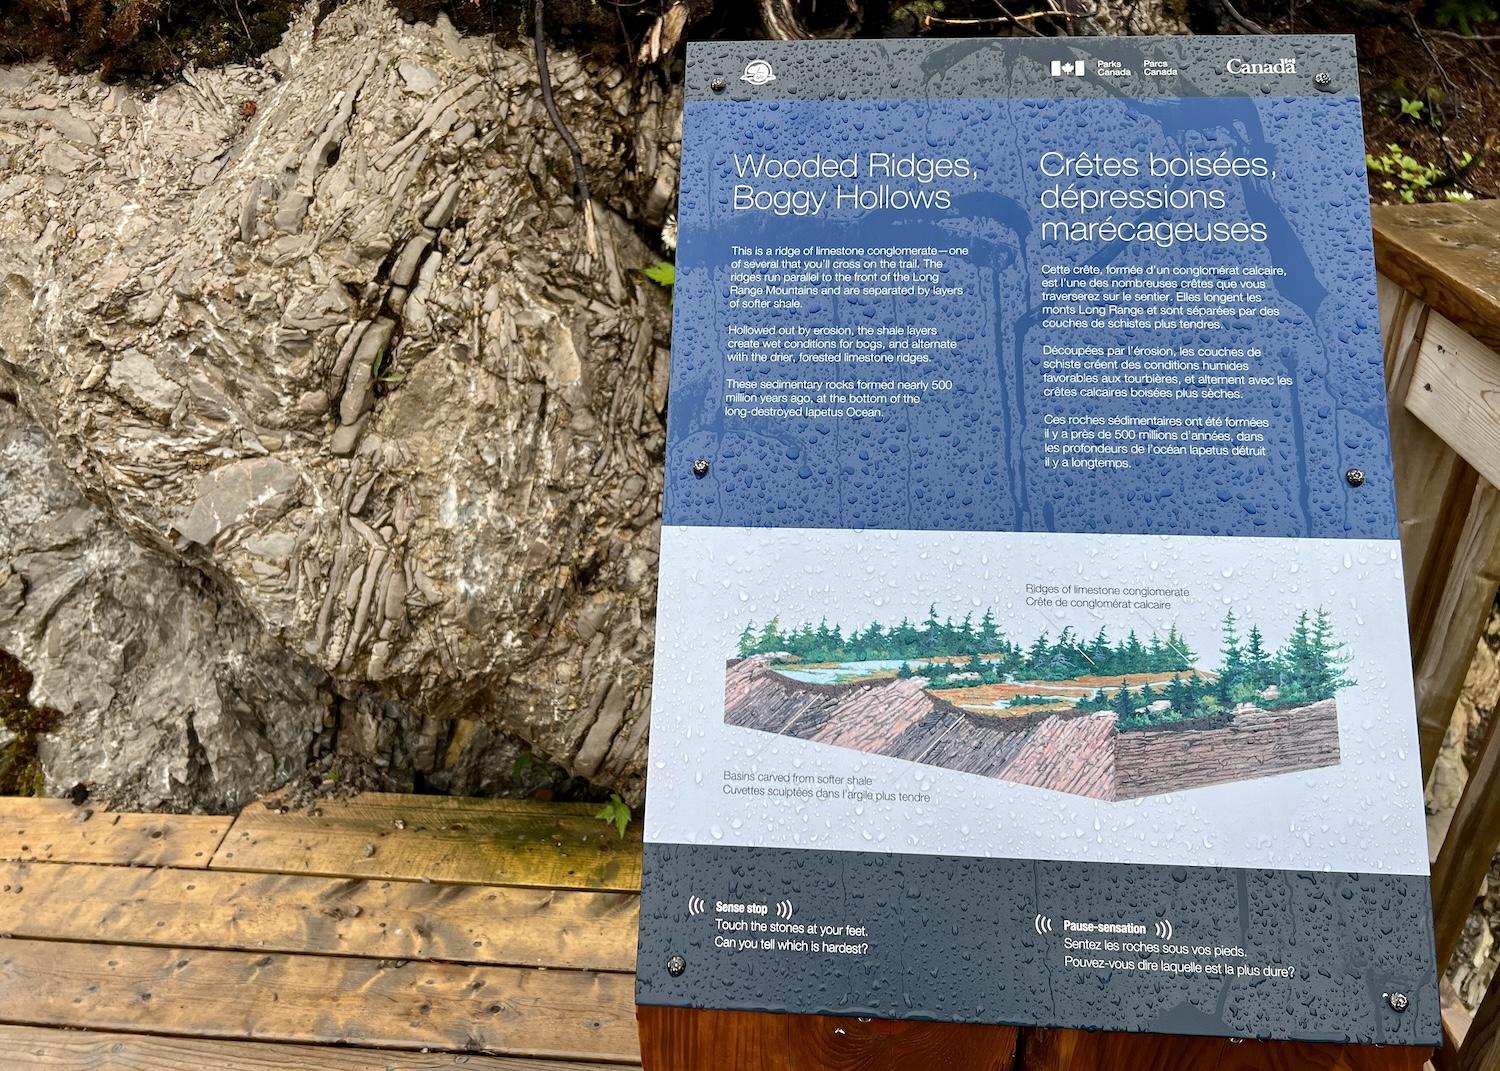 An interpretive sign explains why a ridge of limestone conglomerate is important.